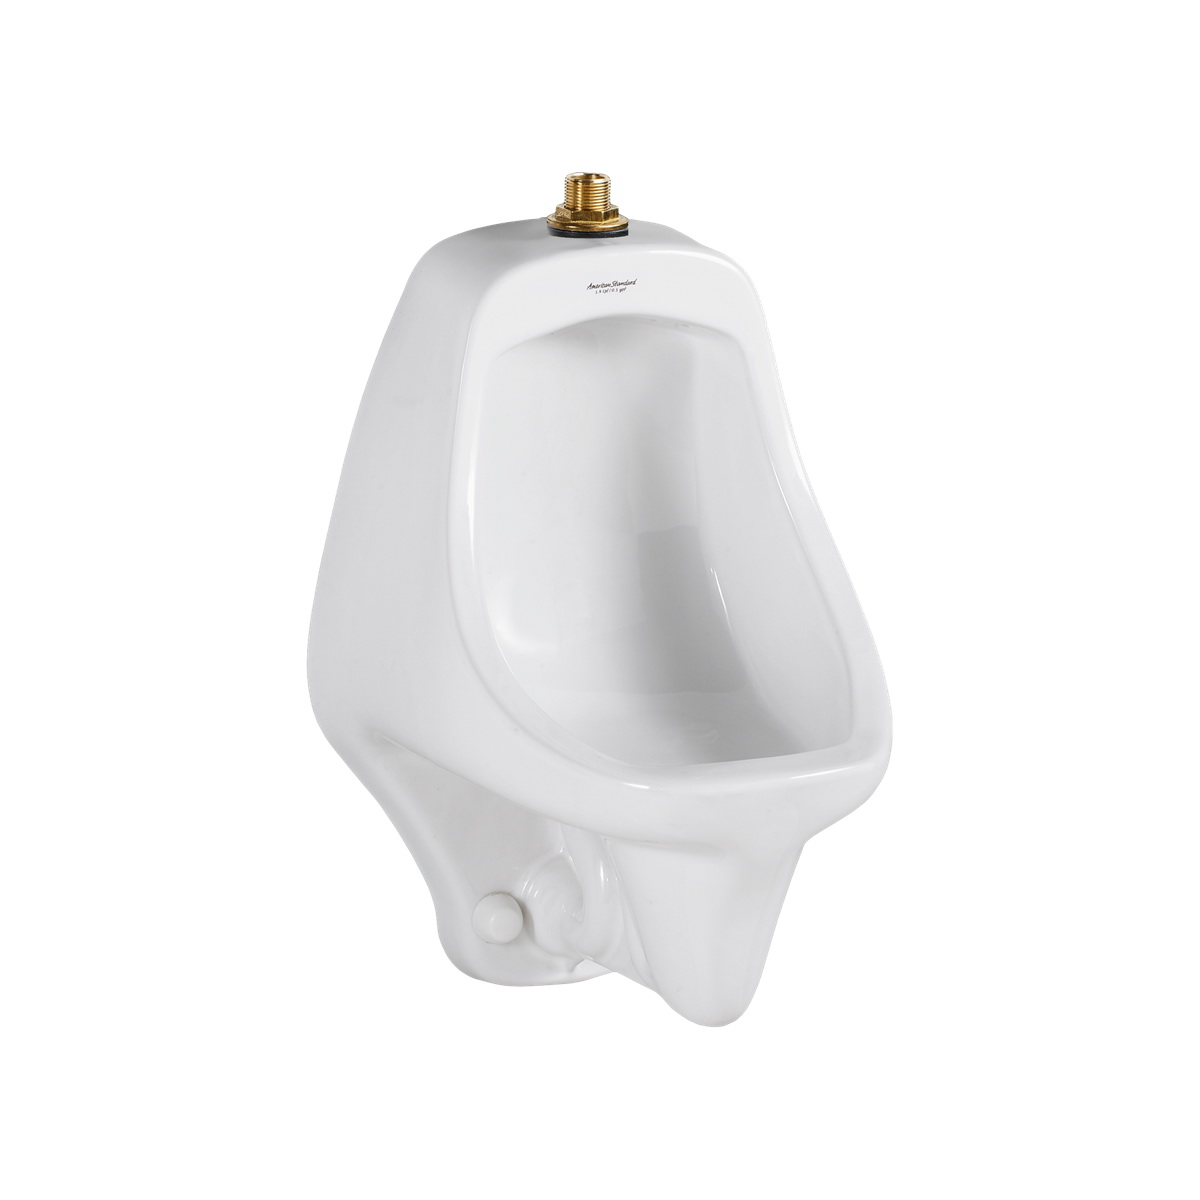 American Standard Allbrook® 6550.001.020 White Vitreous China Wall Mount High Efficiency Universal Urinal, NPTF Outlet, 0.5 - 1 gpf